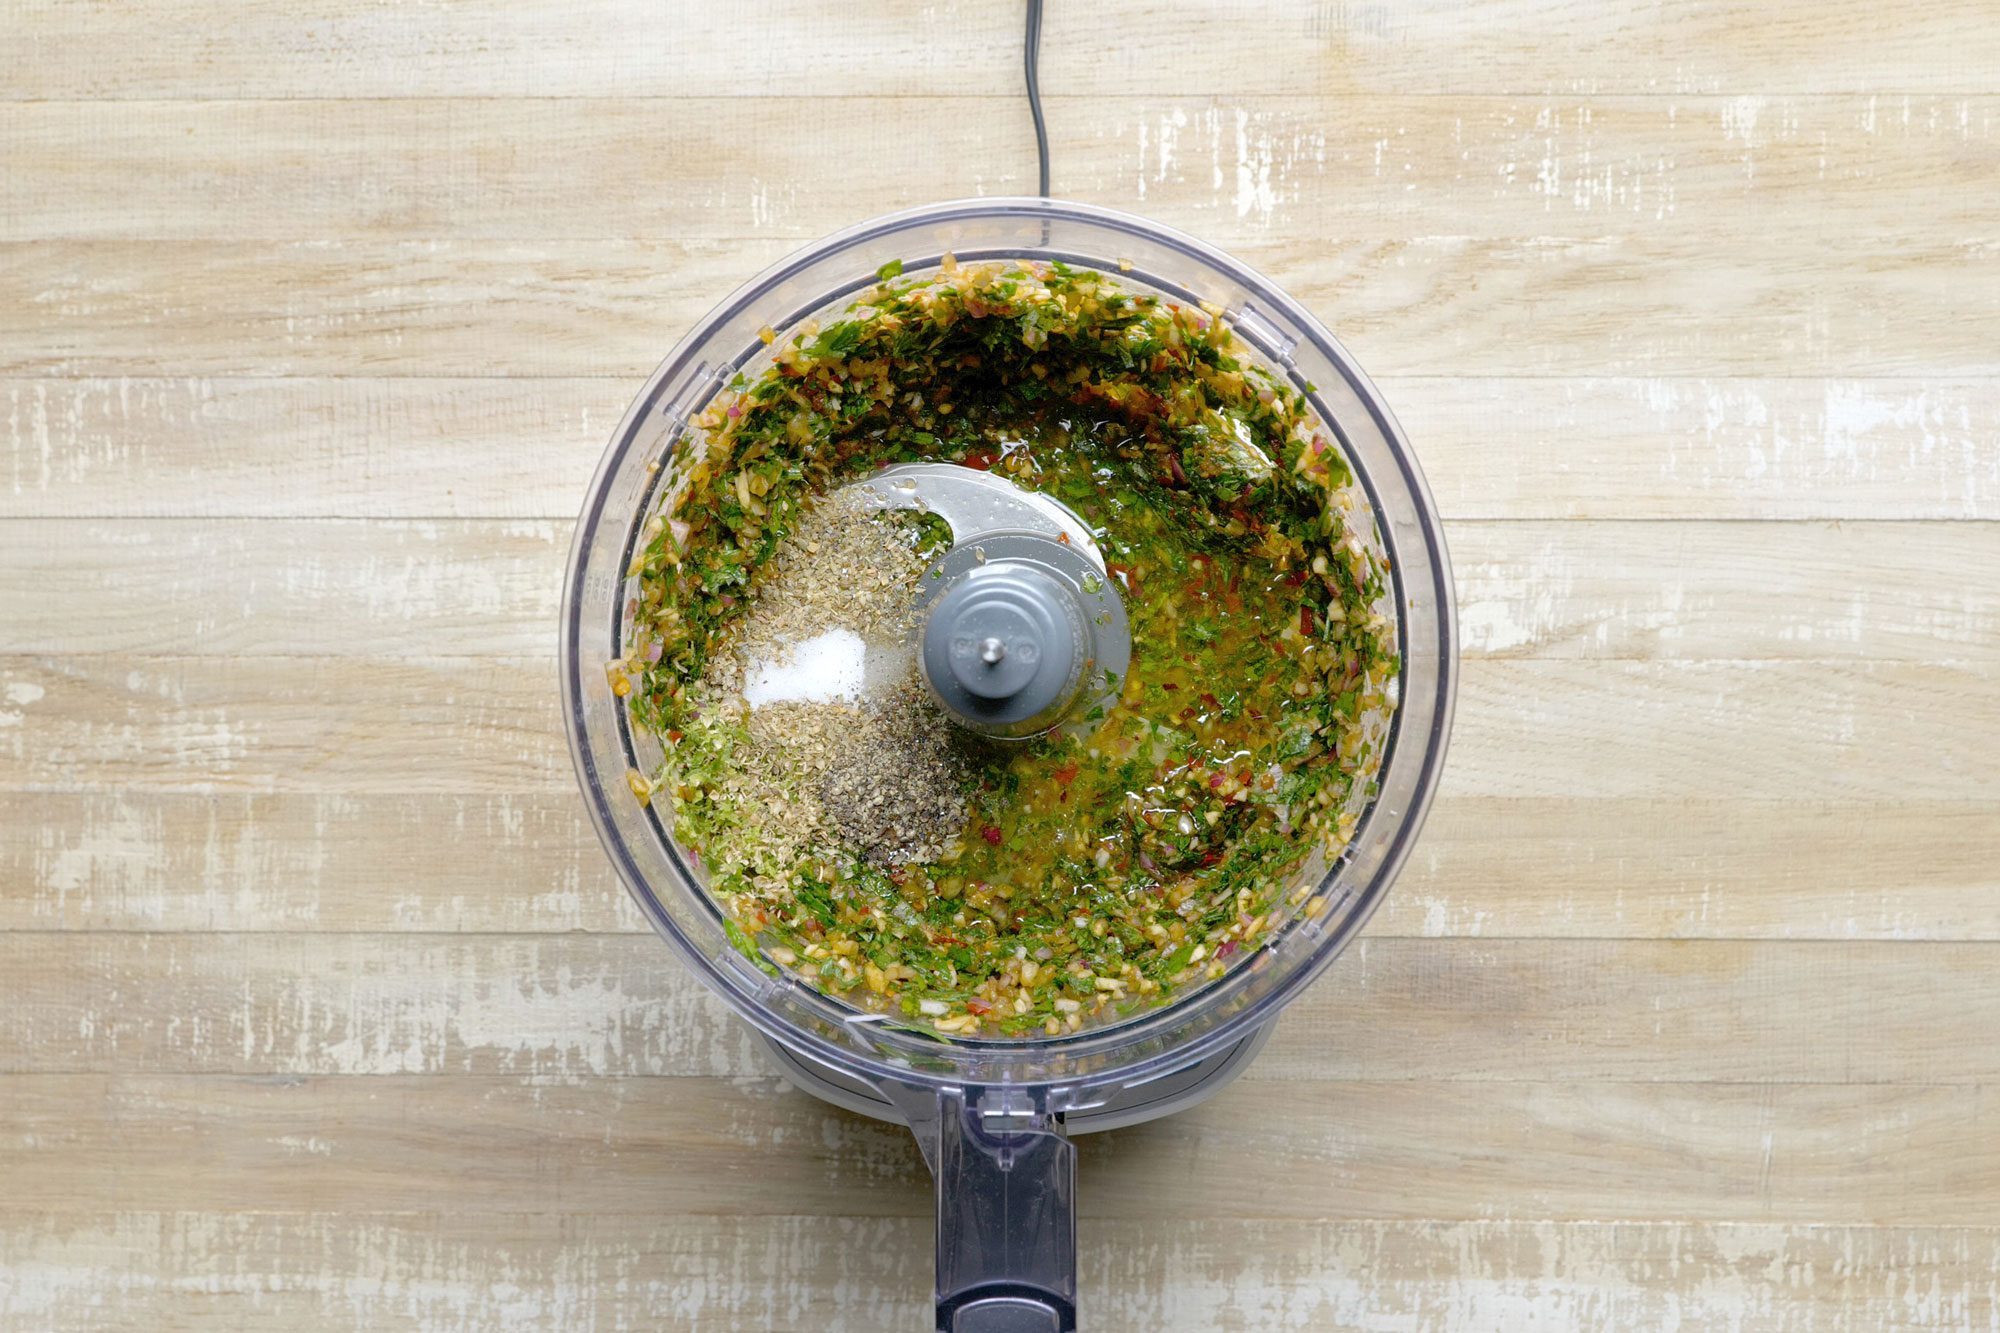 Transfer the chimichurri to a bowl and refrigerate